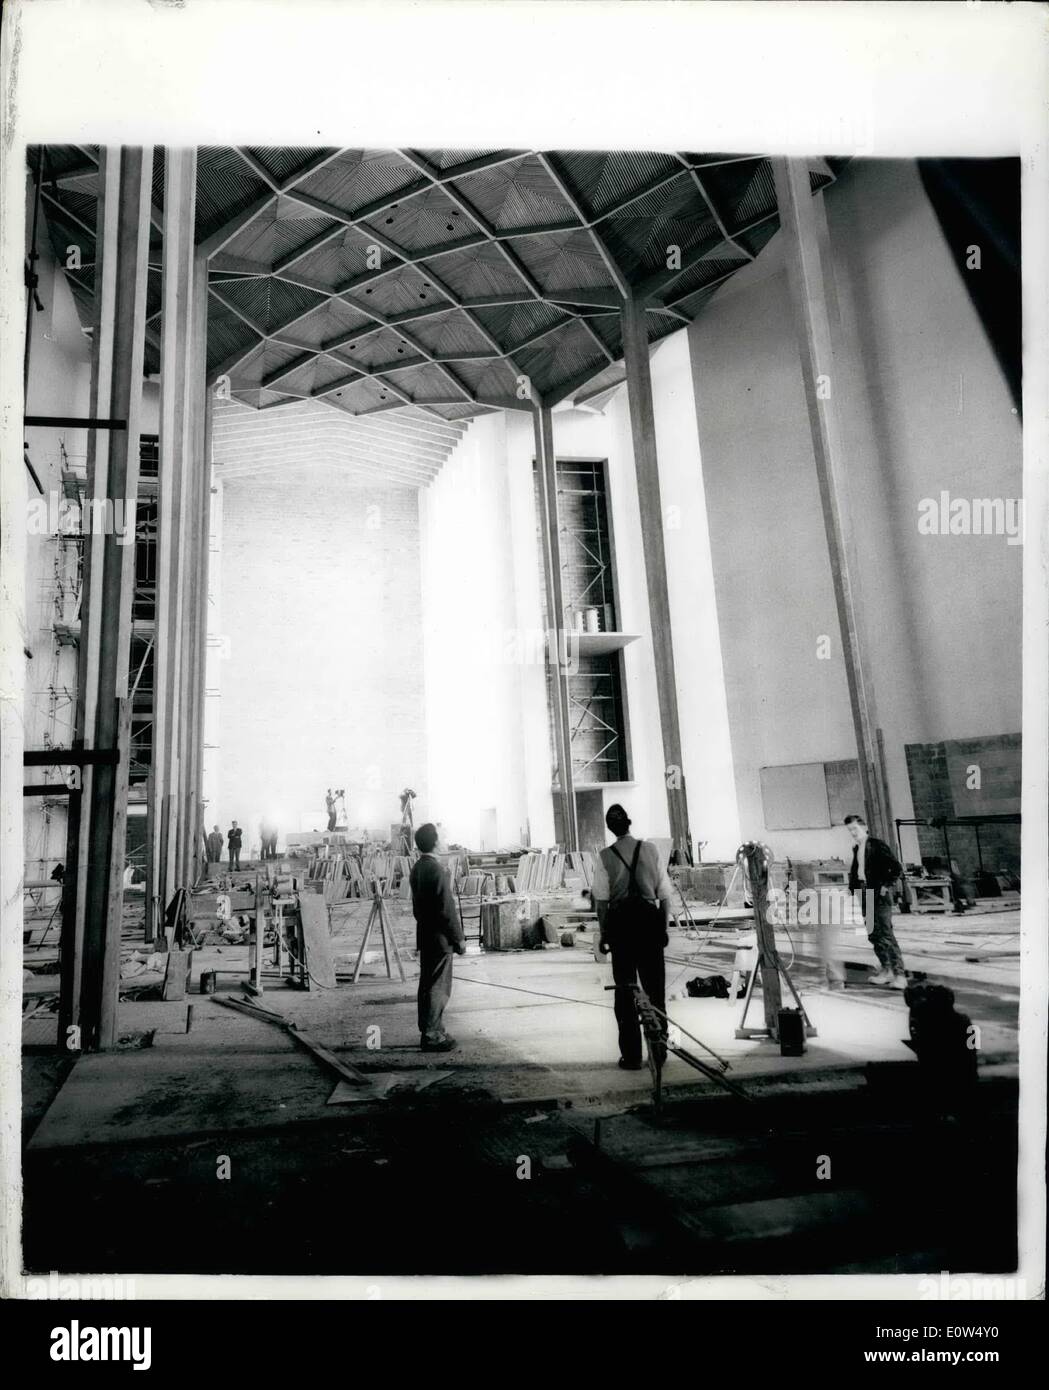 May 05, 1961 - Press View Of New Coventry Cathedral Progress.. View From Nave- Looking Towards High Altar: members of the Press Stock Photo